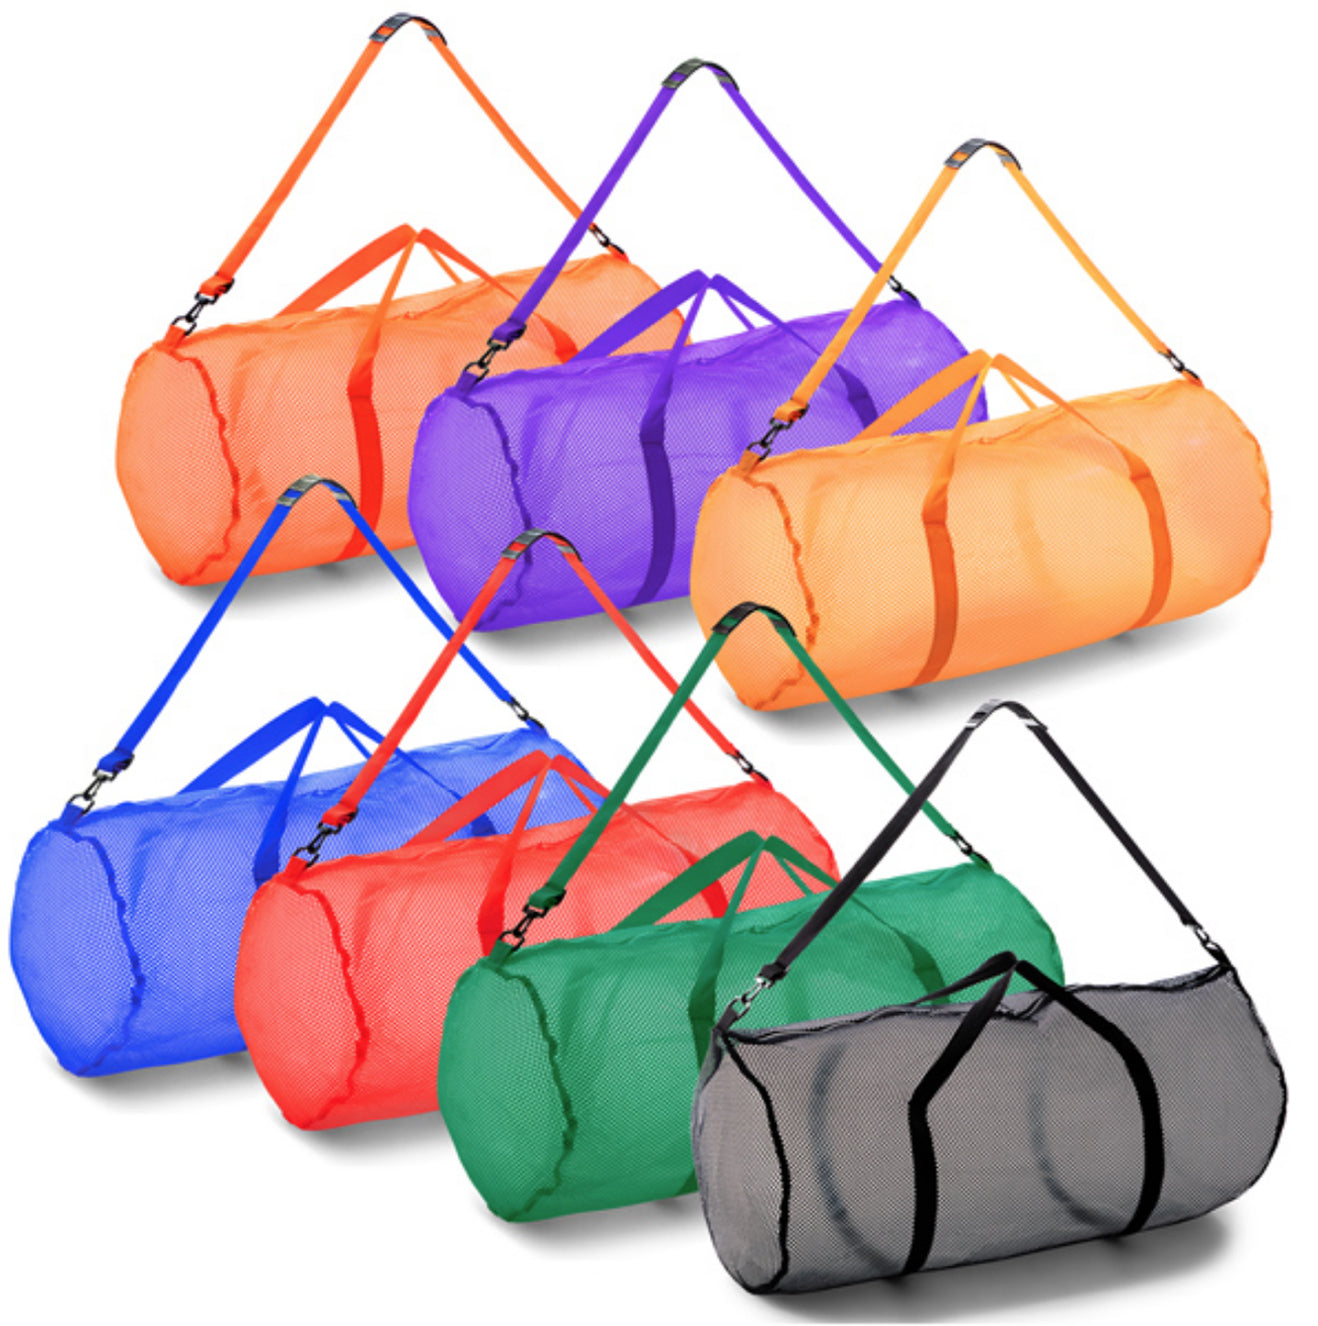 Mesh Duffel Bag with Shoulder Strap - Youth Sports Products